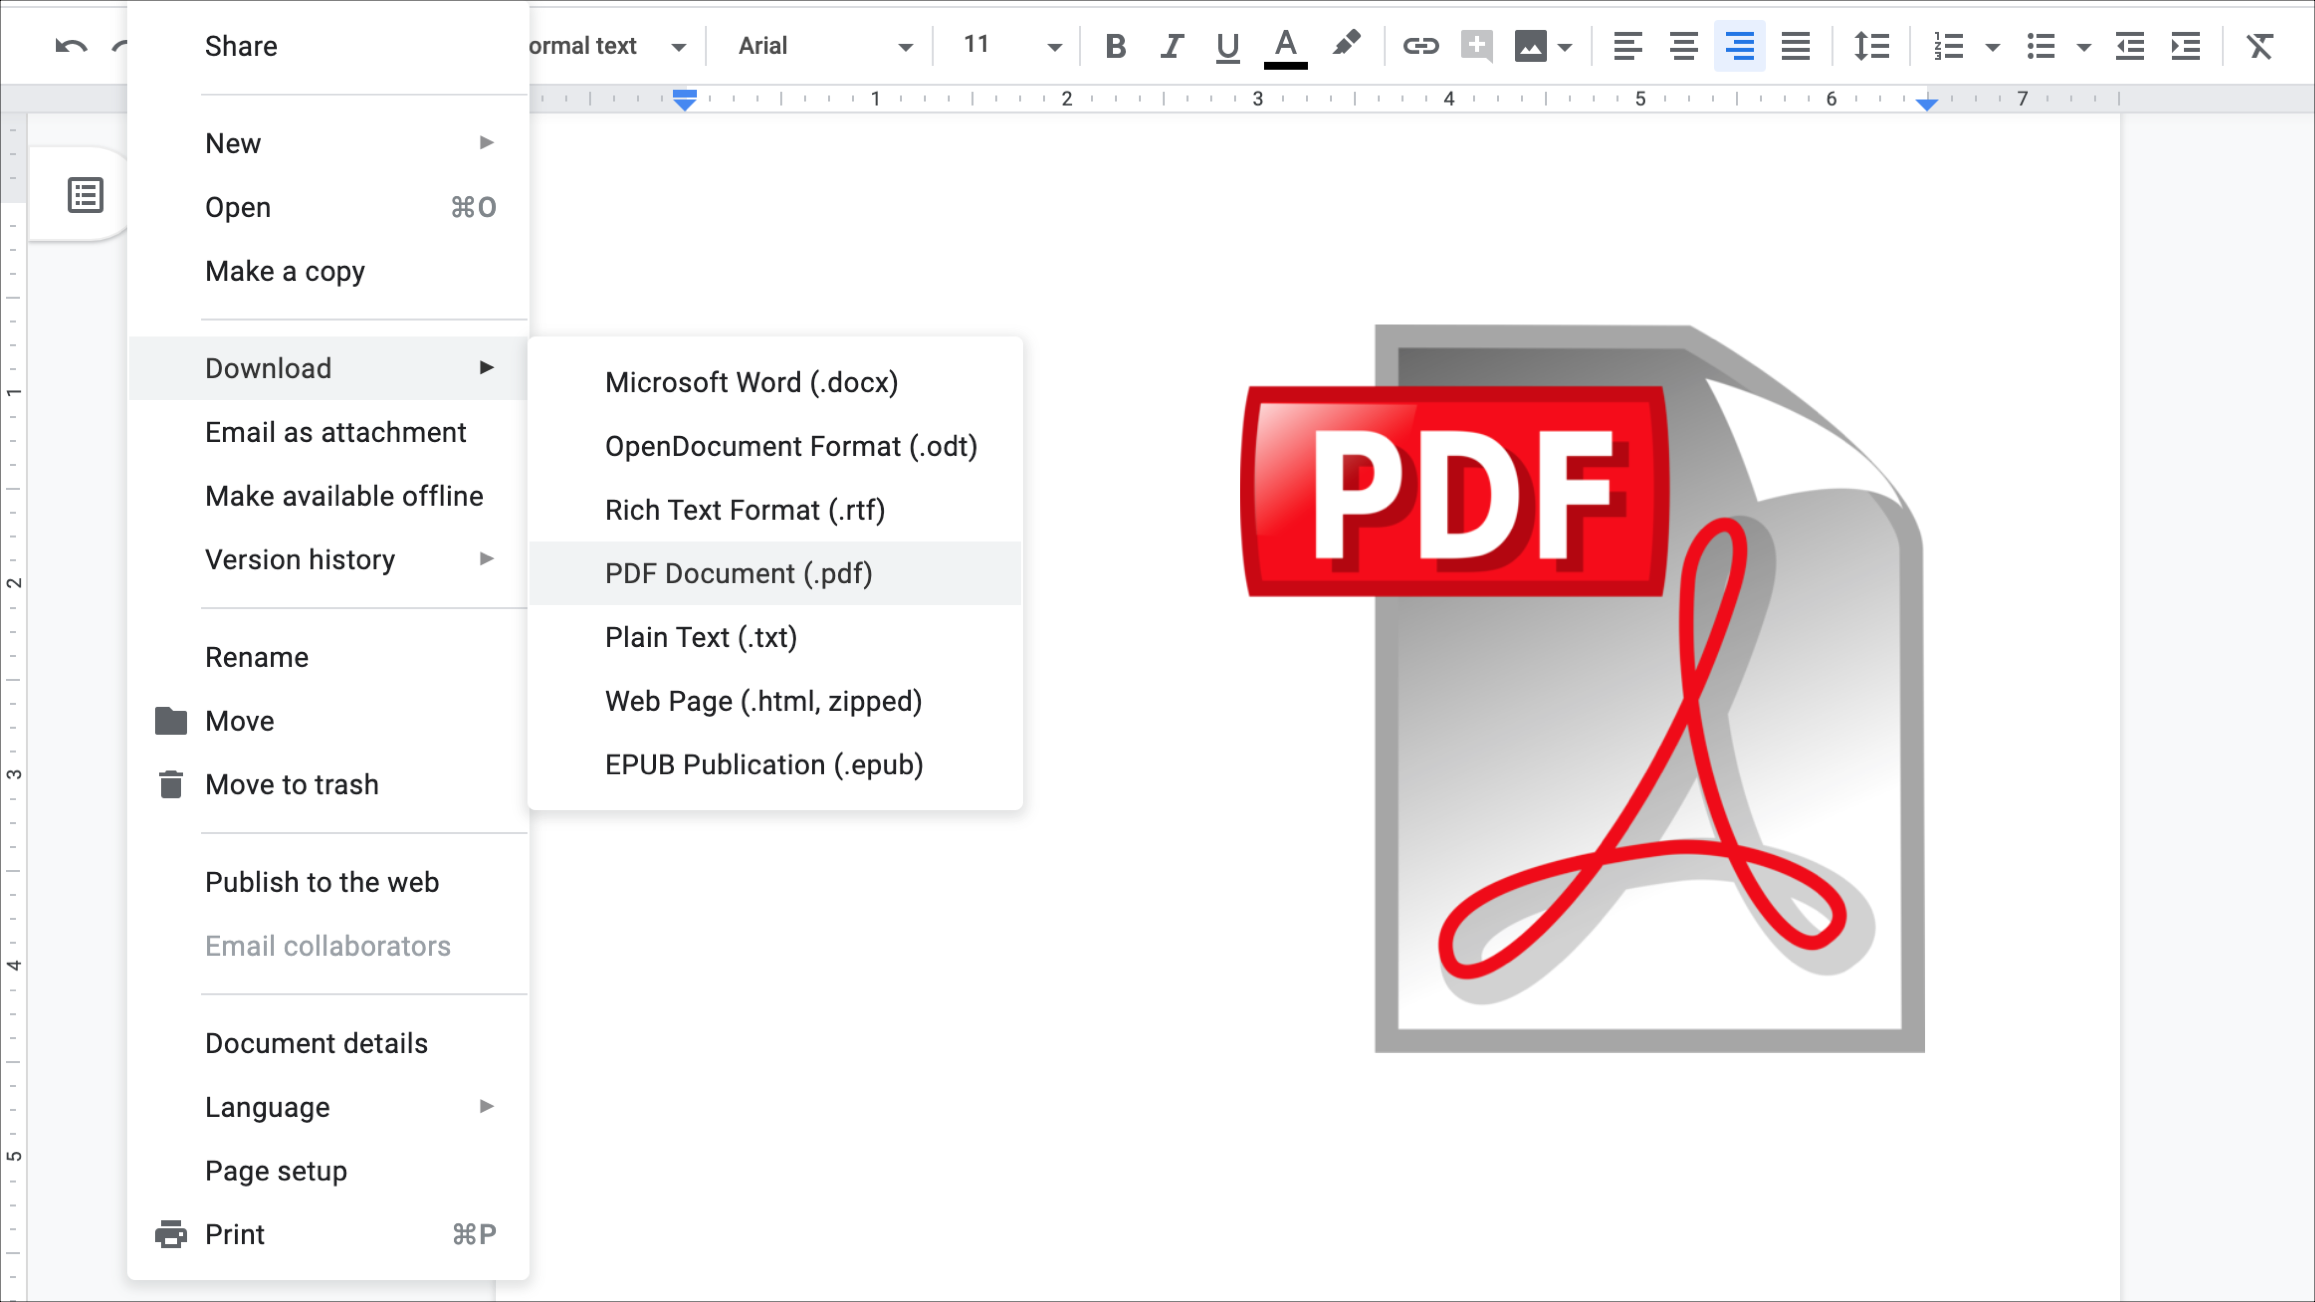 How to create a PDF from a document in Google Docs - 26to26Google